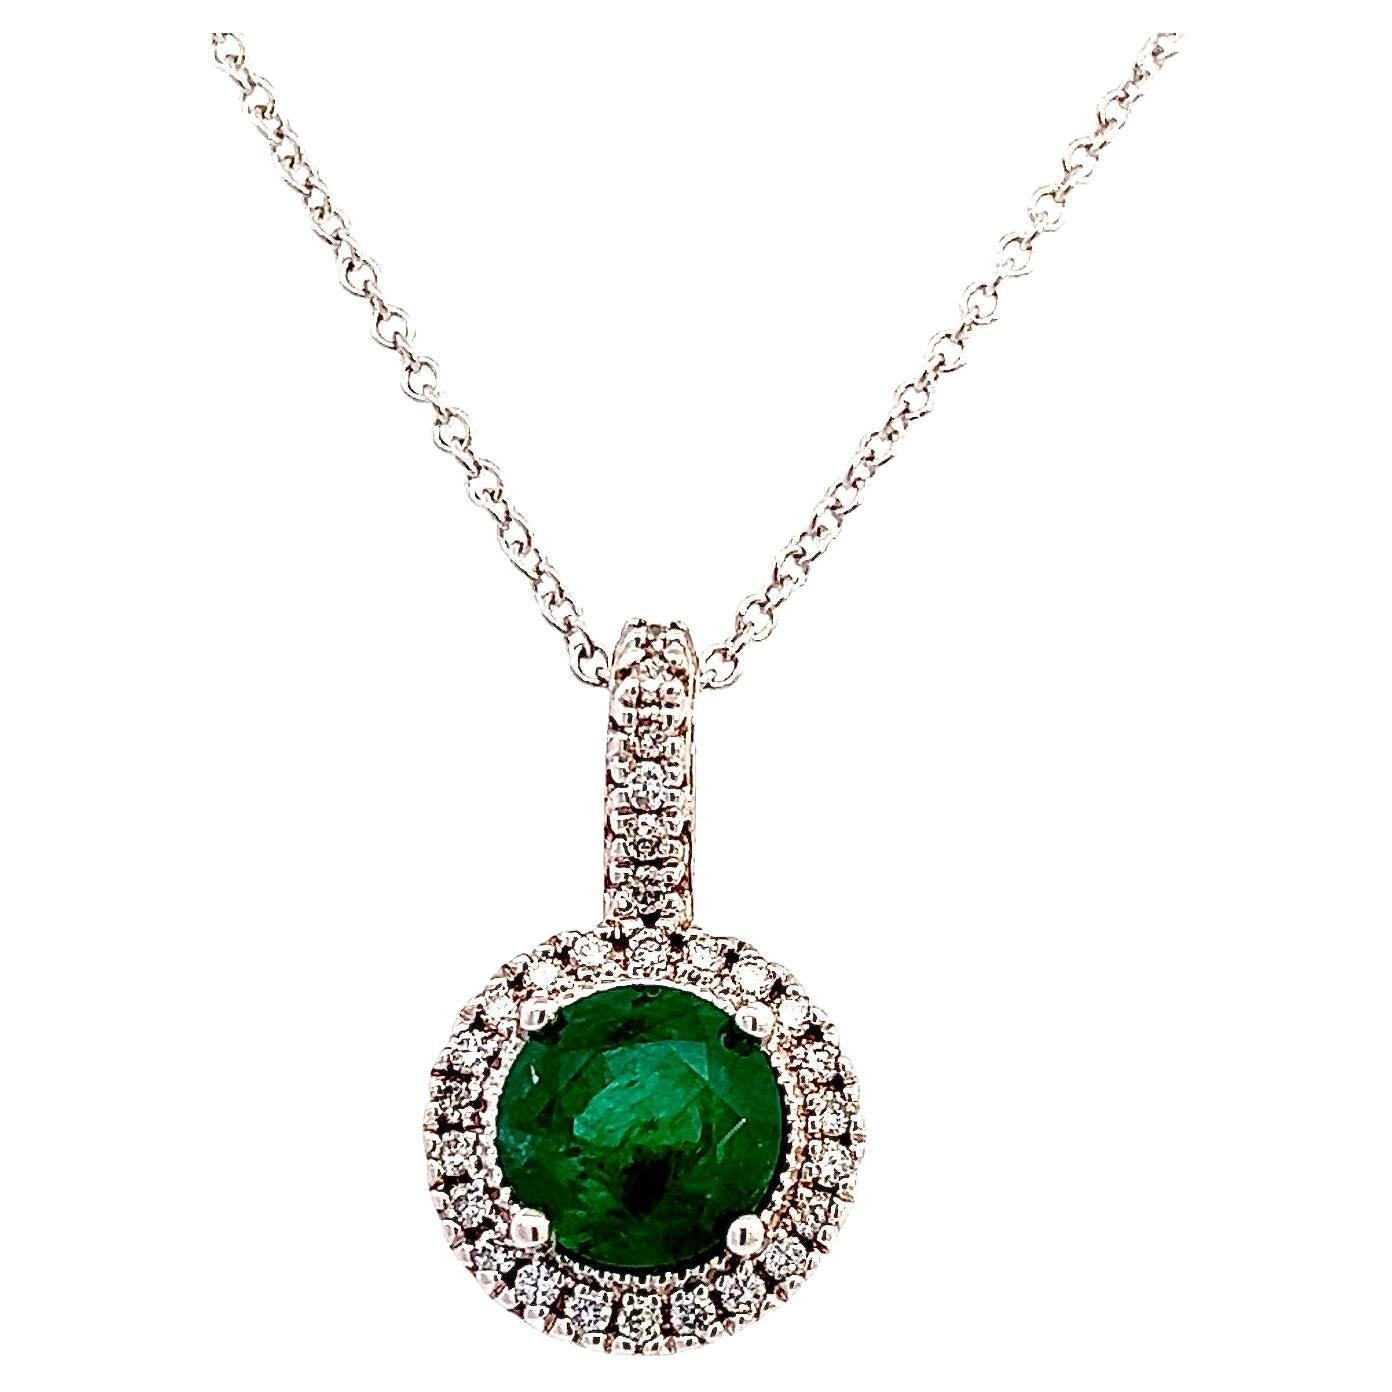 Natural Emerald Diamond Pendant Necklace 18" 14k W Gold 1.90 TCW Certified